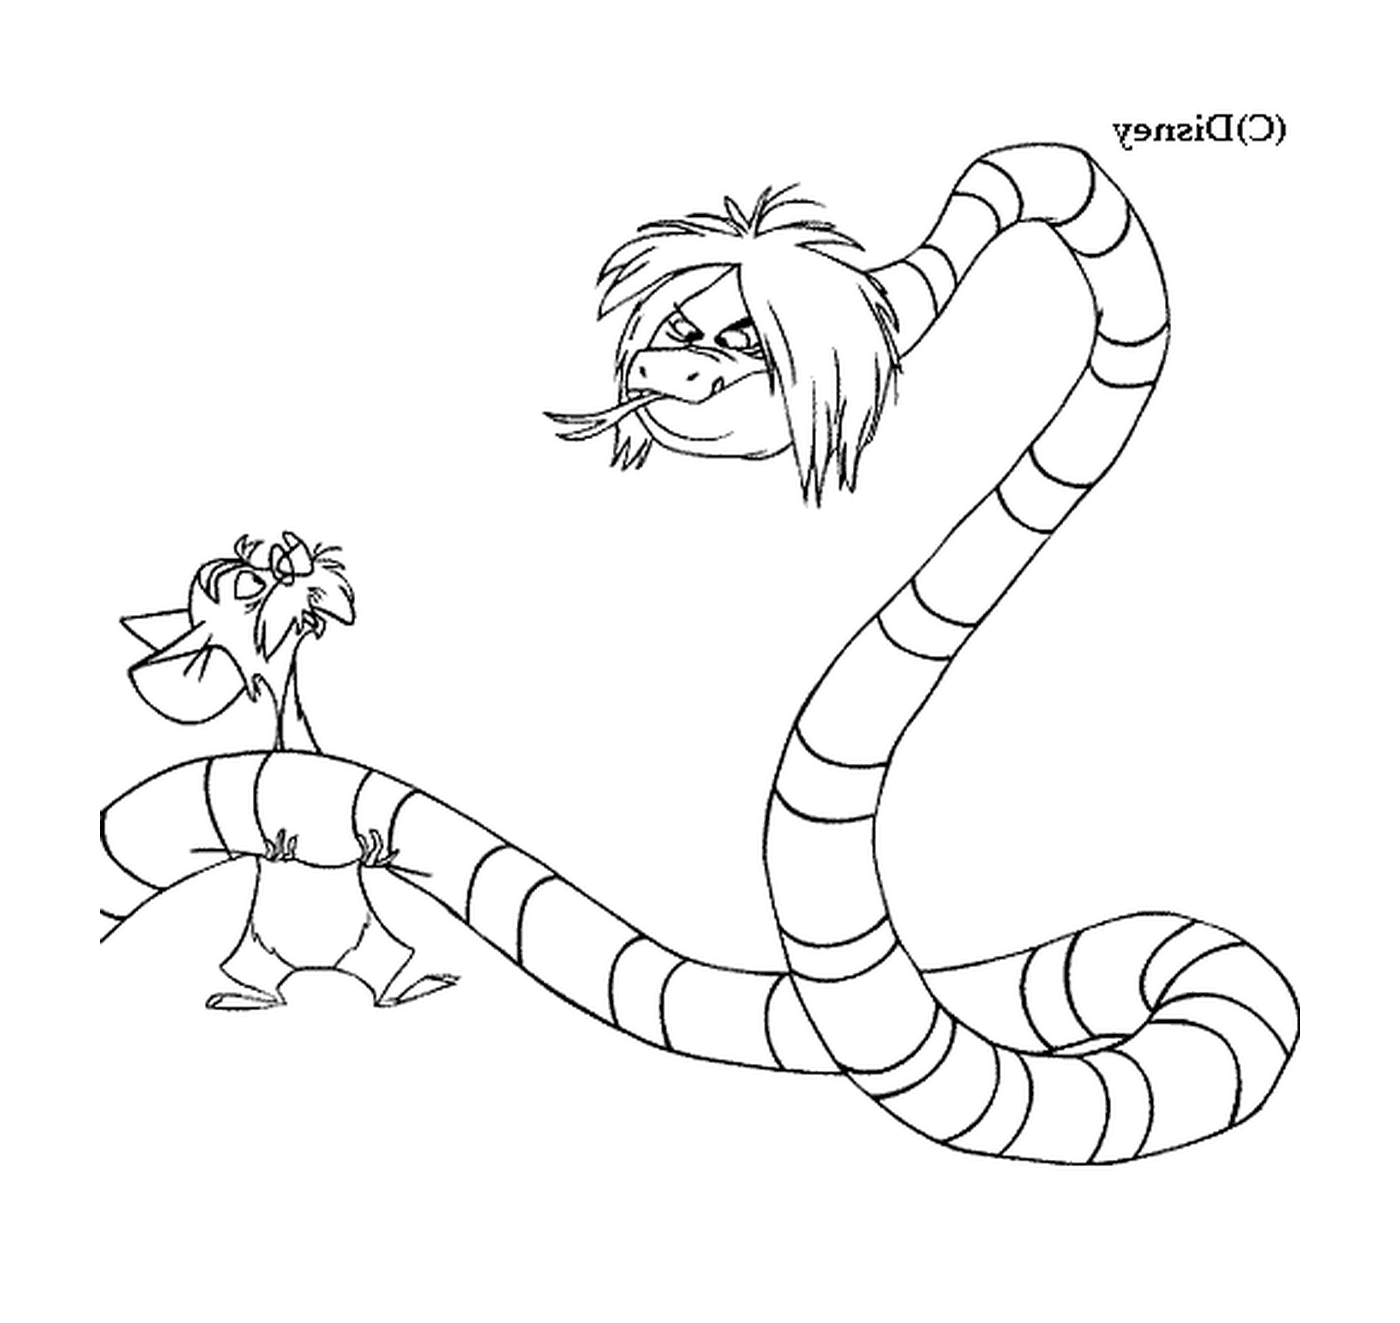  Merlin and Mim transformed into a snake and mouse 